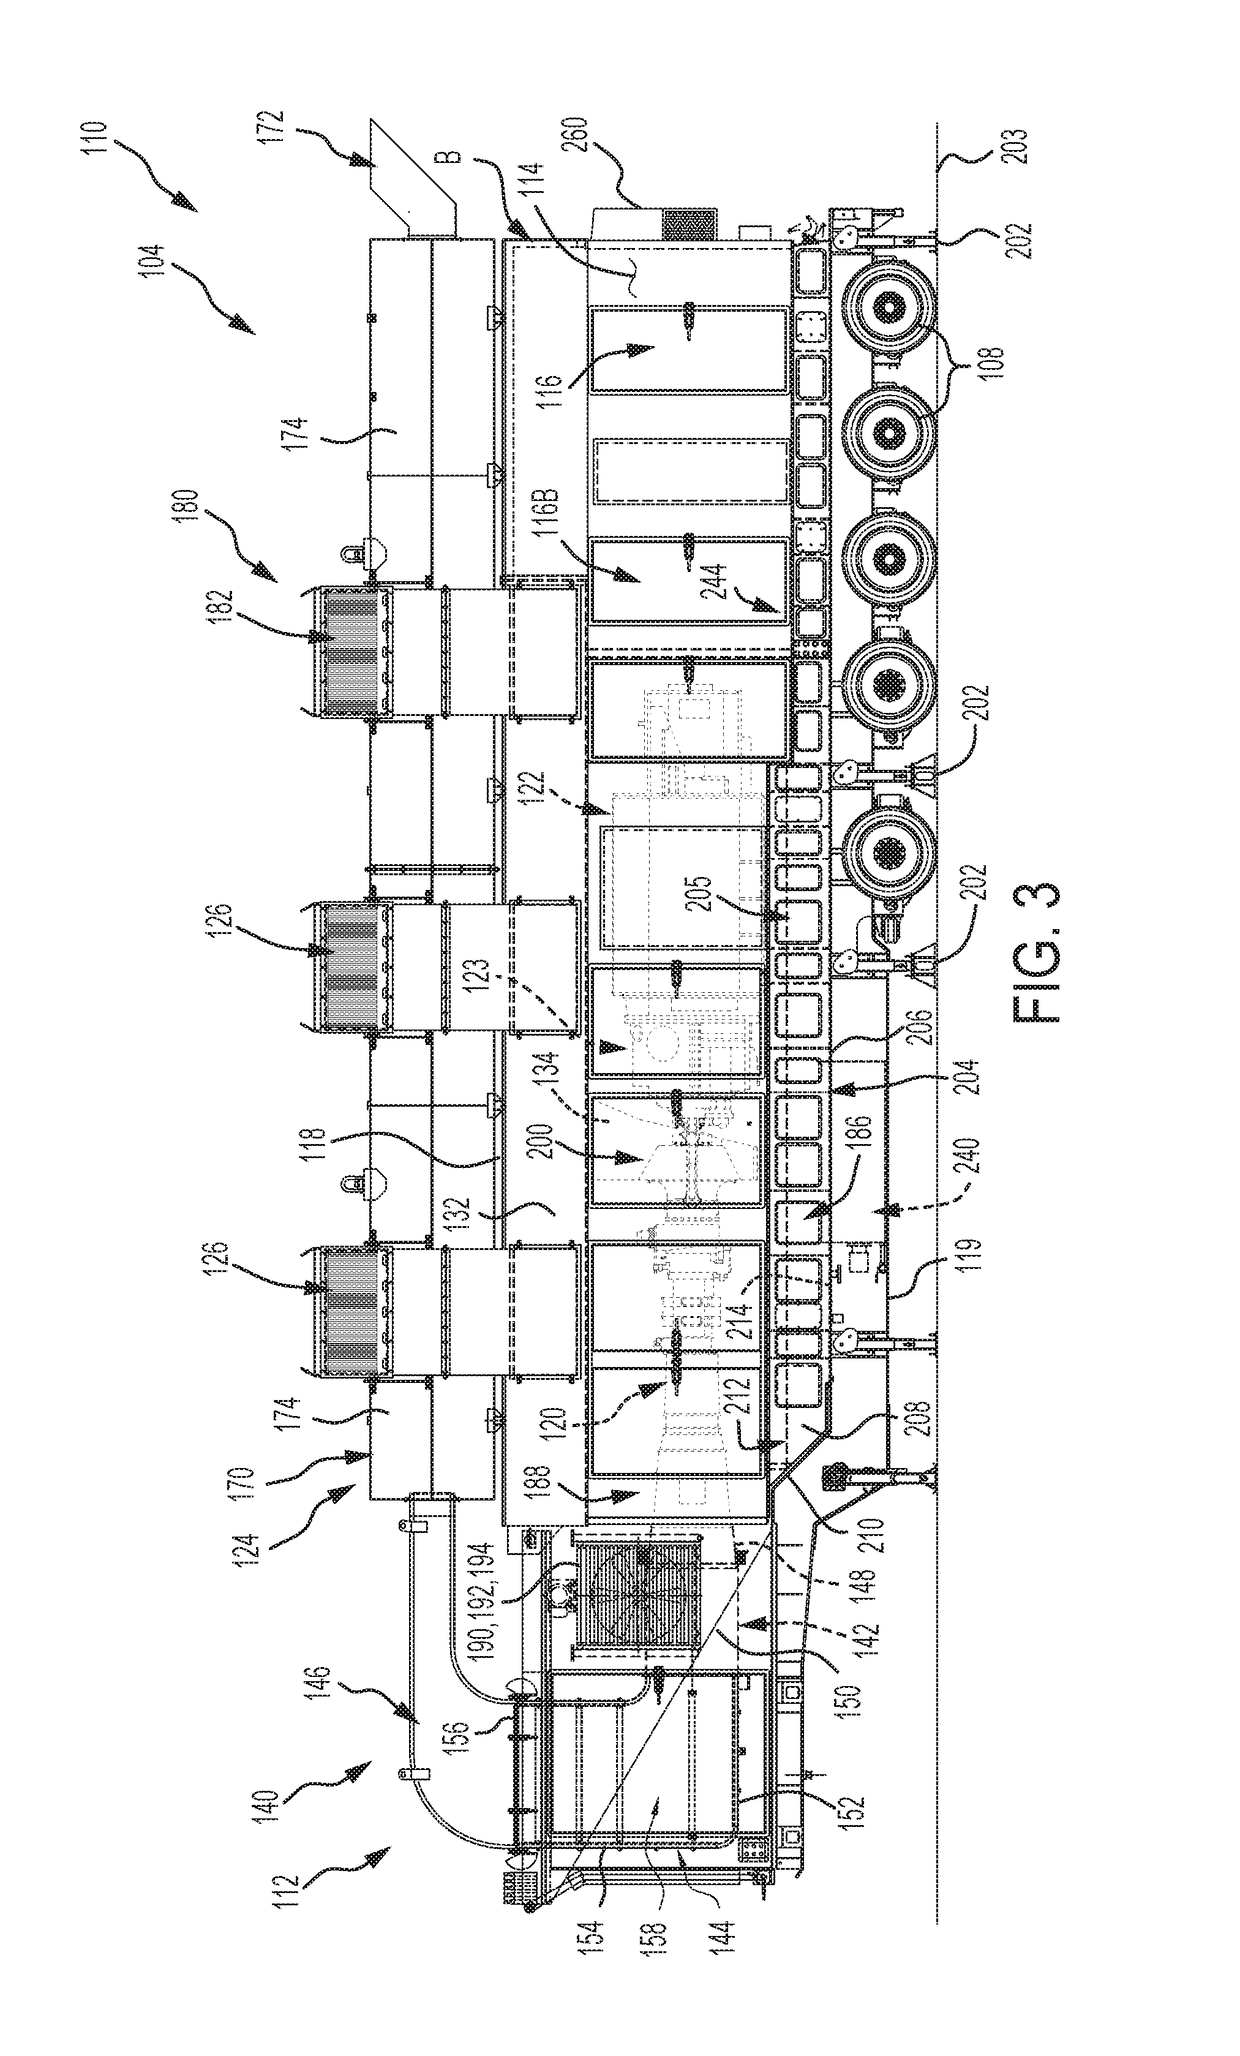 Mobile power generation system including noise attenuation